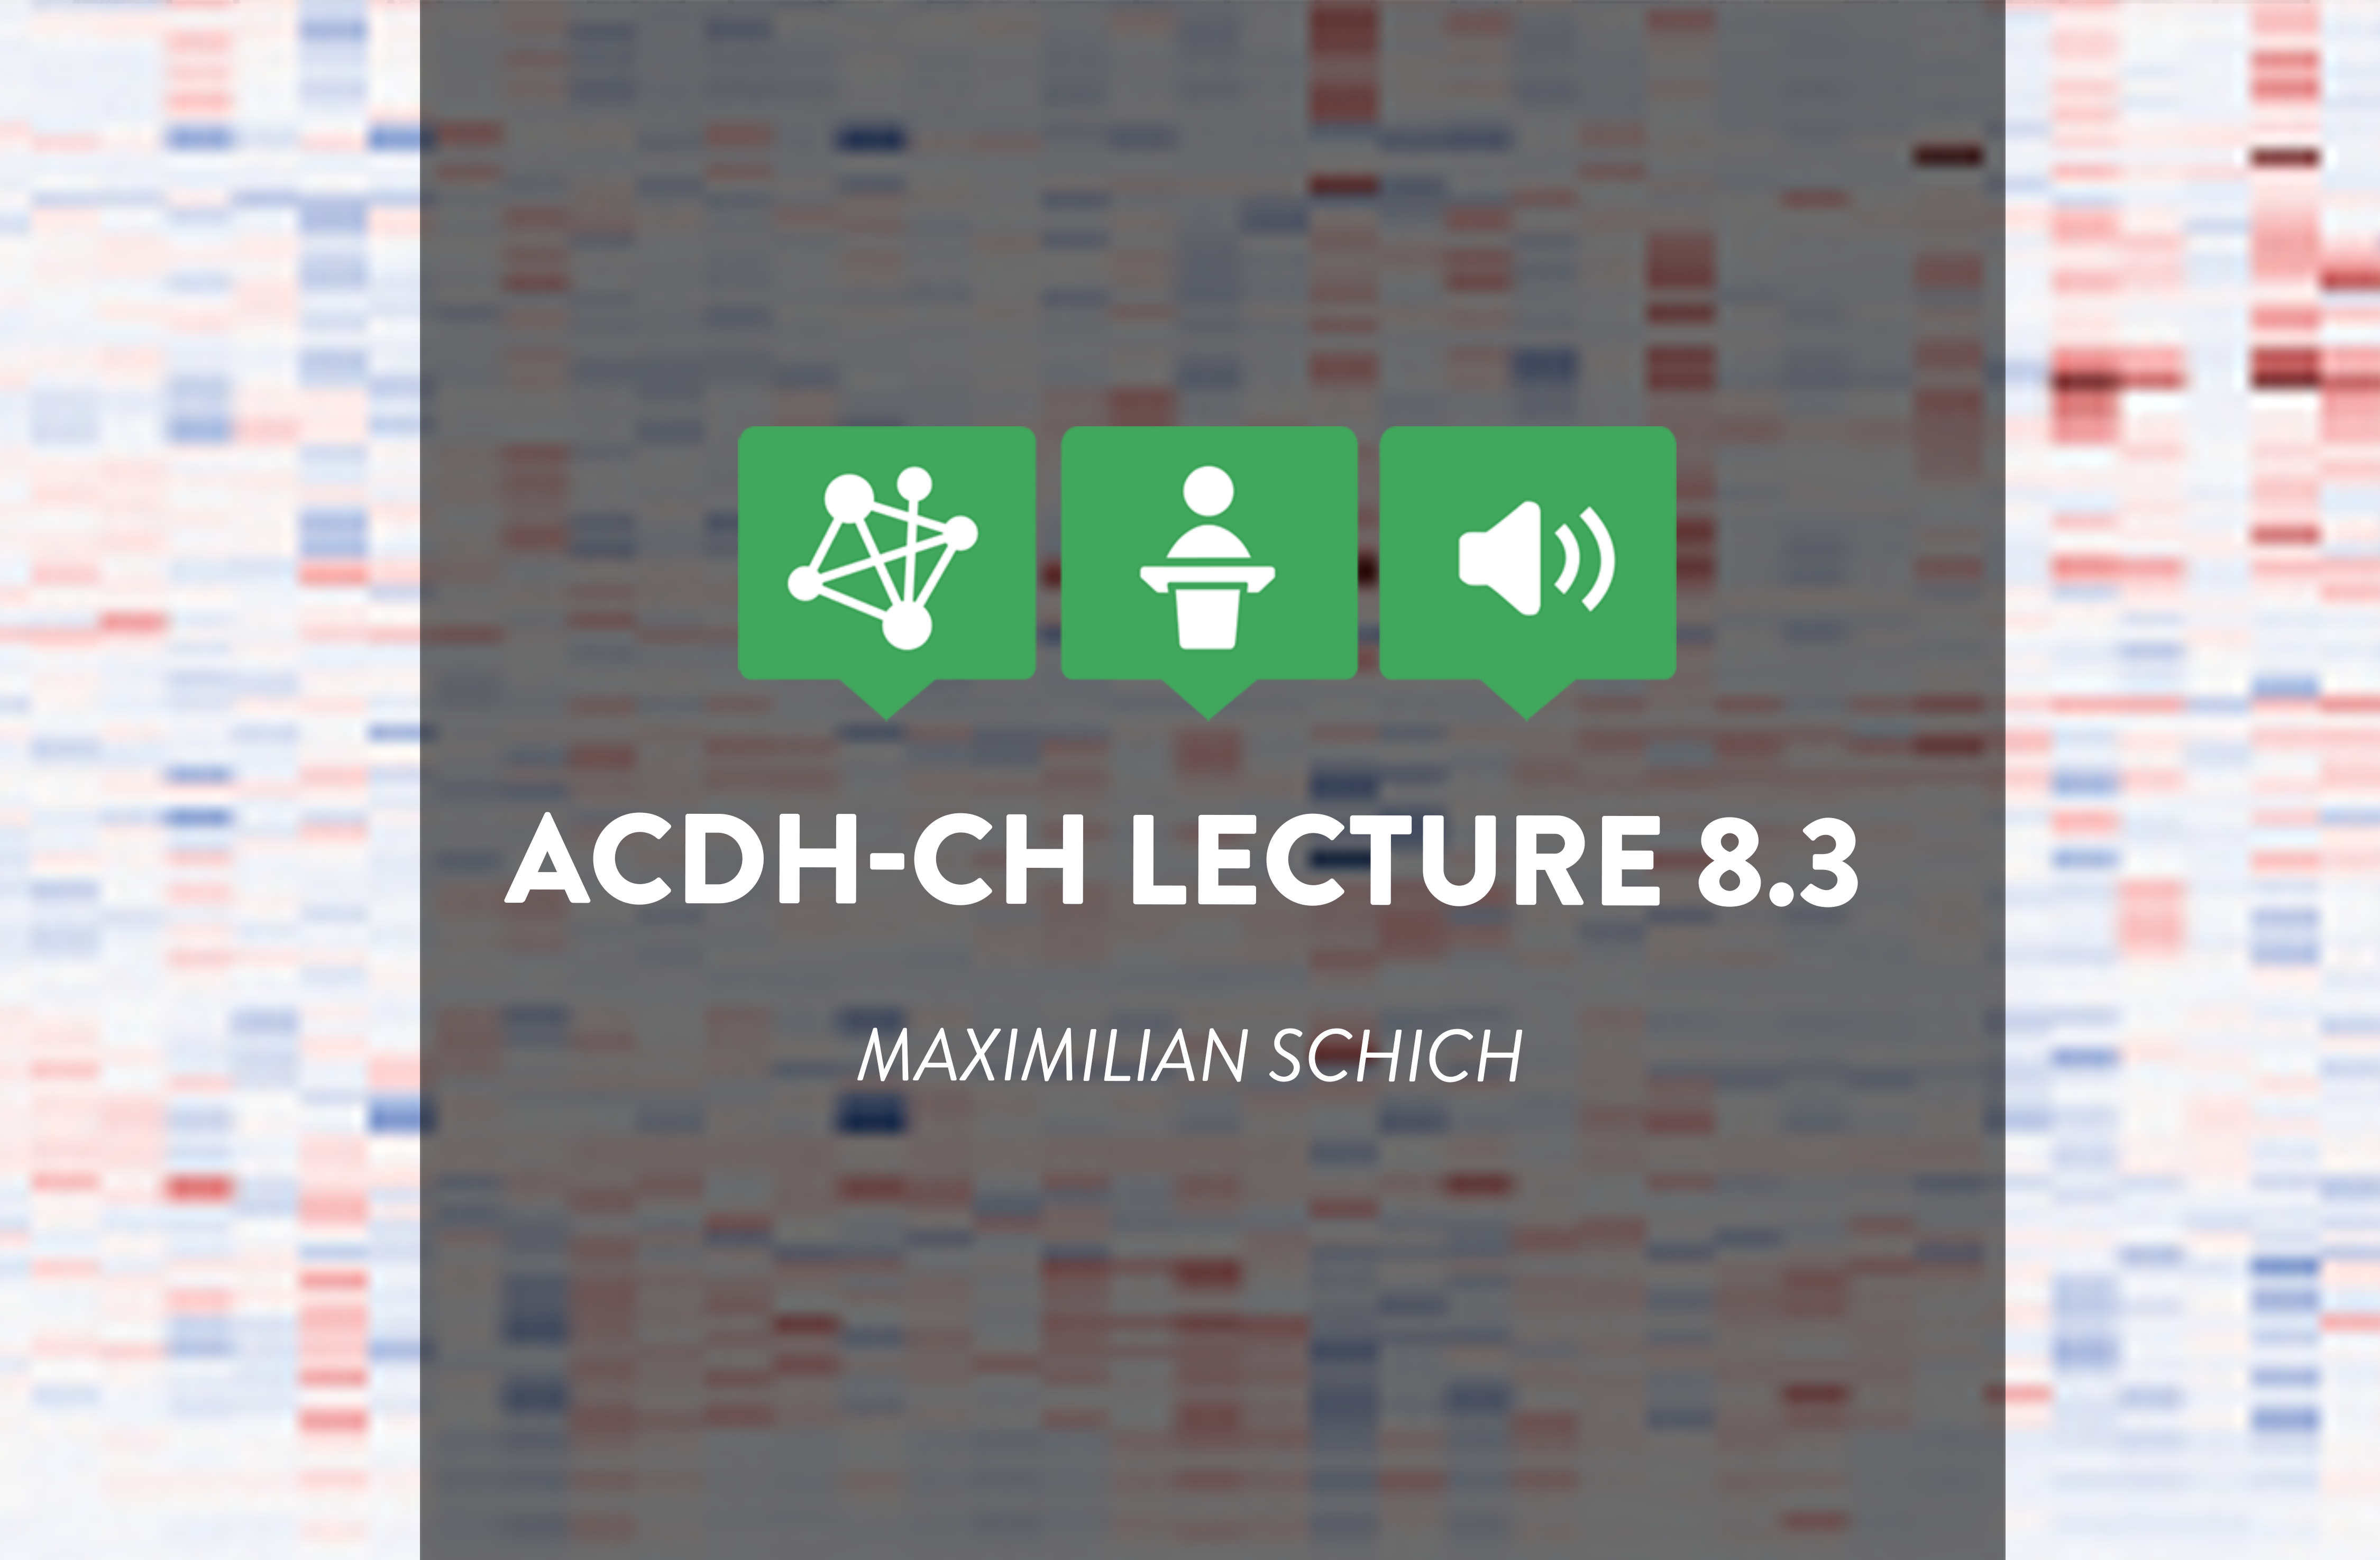 ACDH-CH Lecture 8.3 – Cultural Analysis as a Multidisciplinary Science